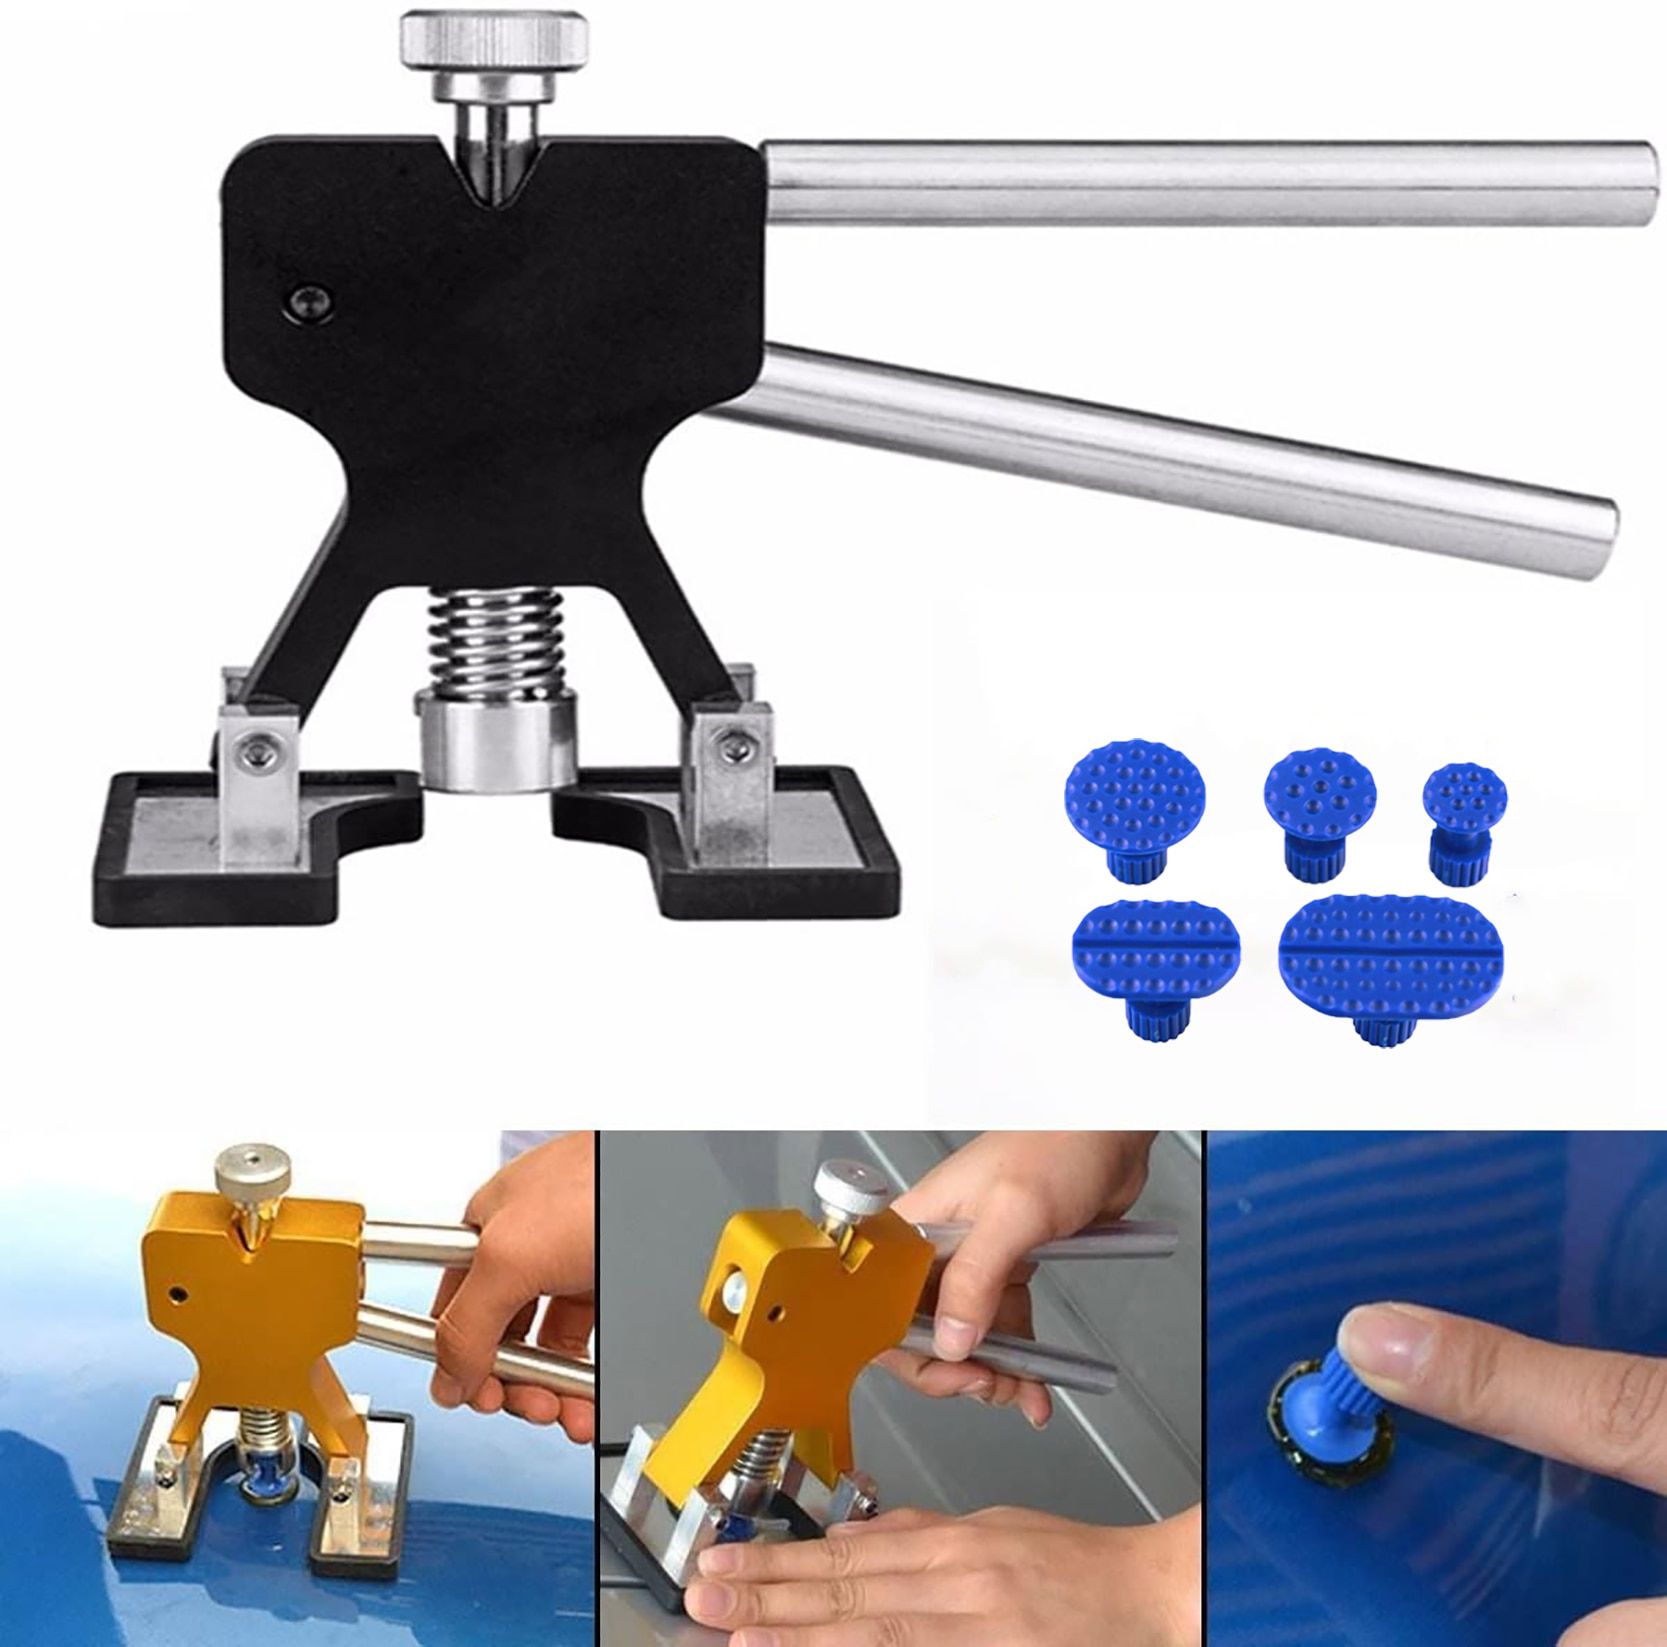 Paintless Dent Repair Puller Tools Dent Puller Slide Hammer T-Bar Tool Dent Removal Pulling Tabs for Car Auto Body